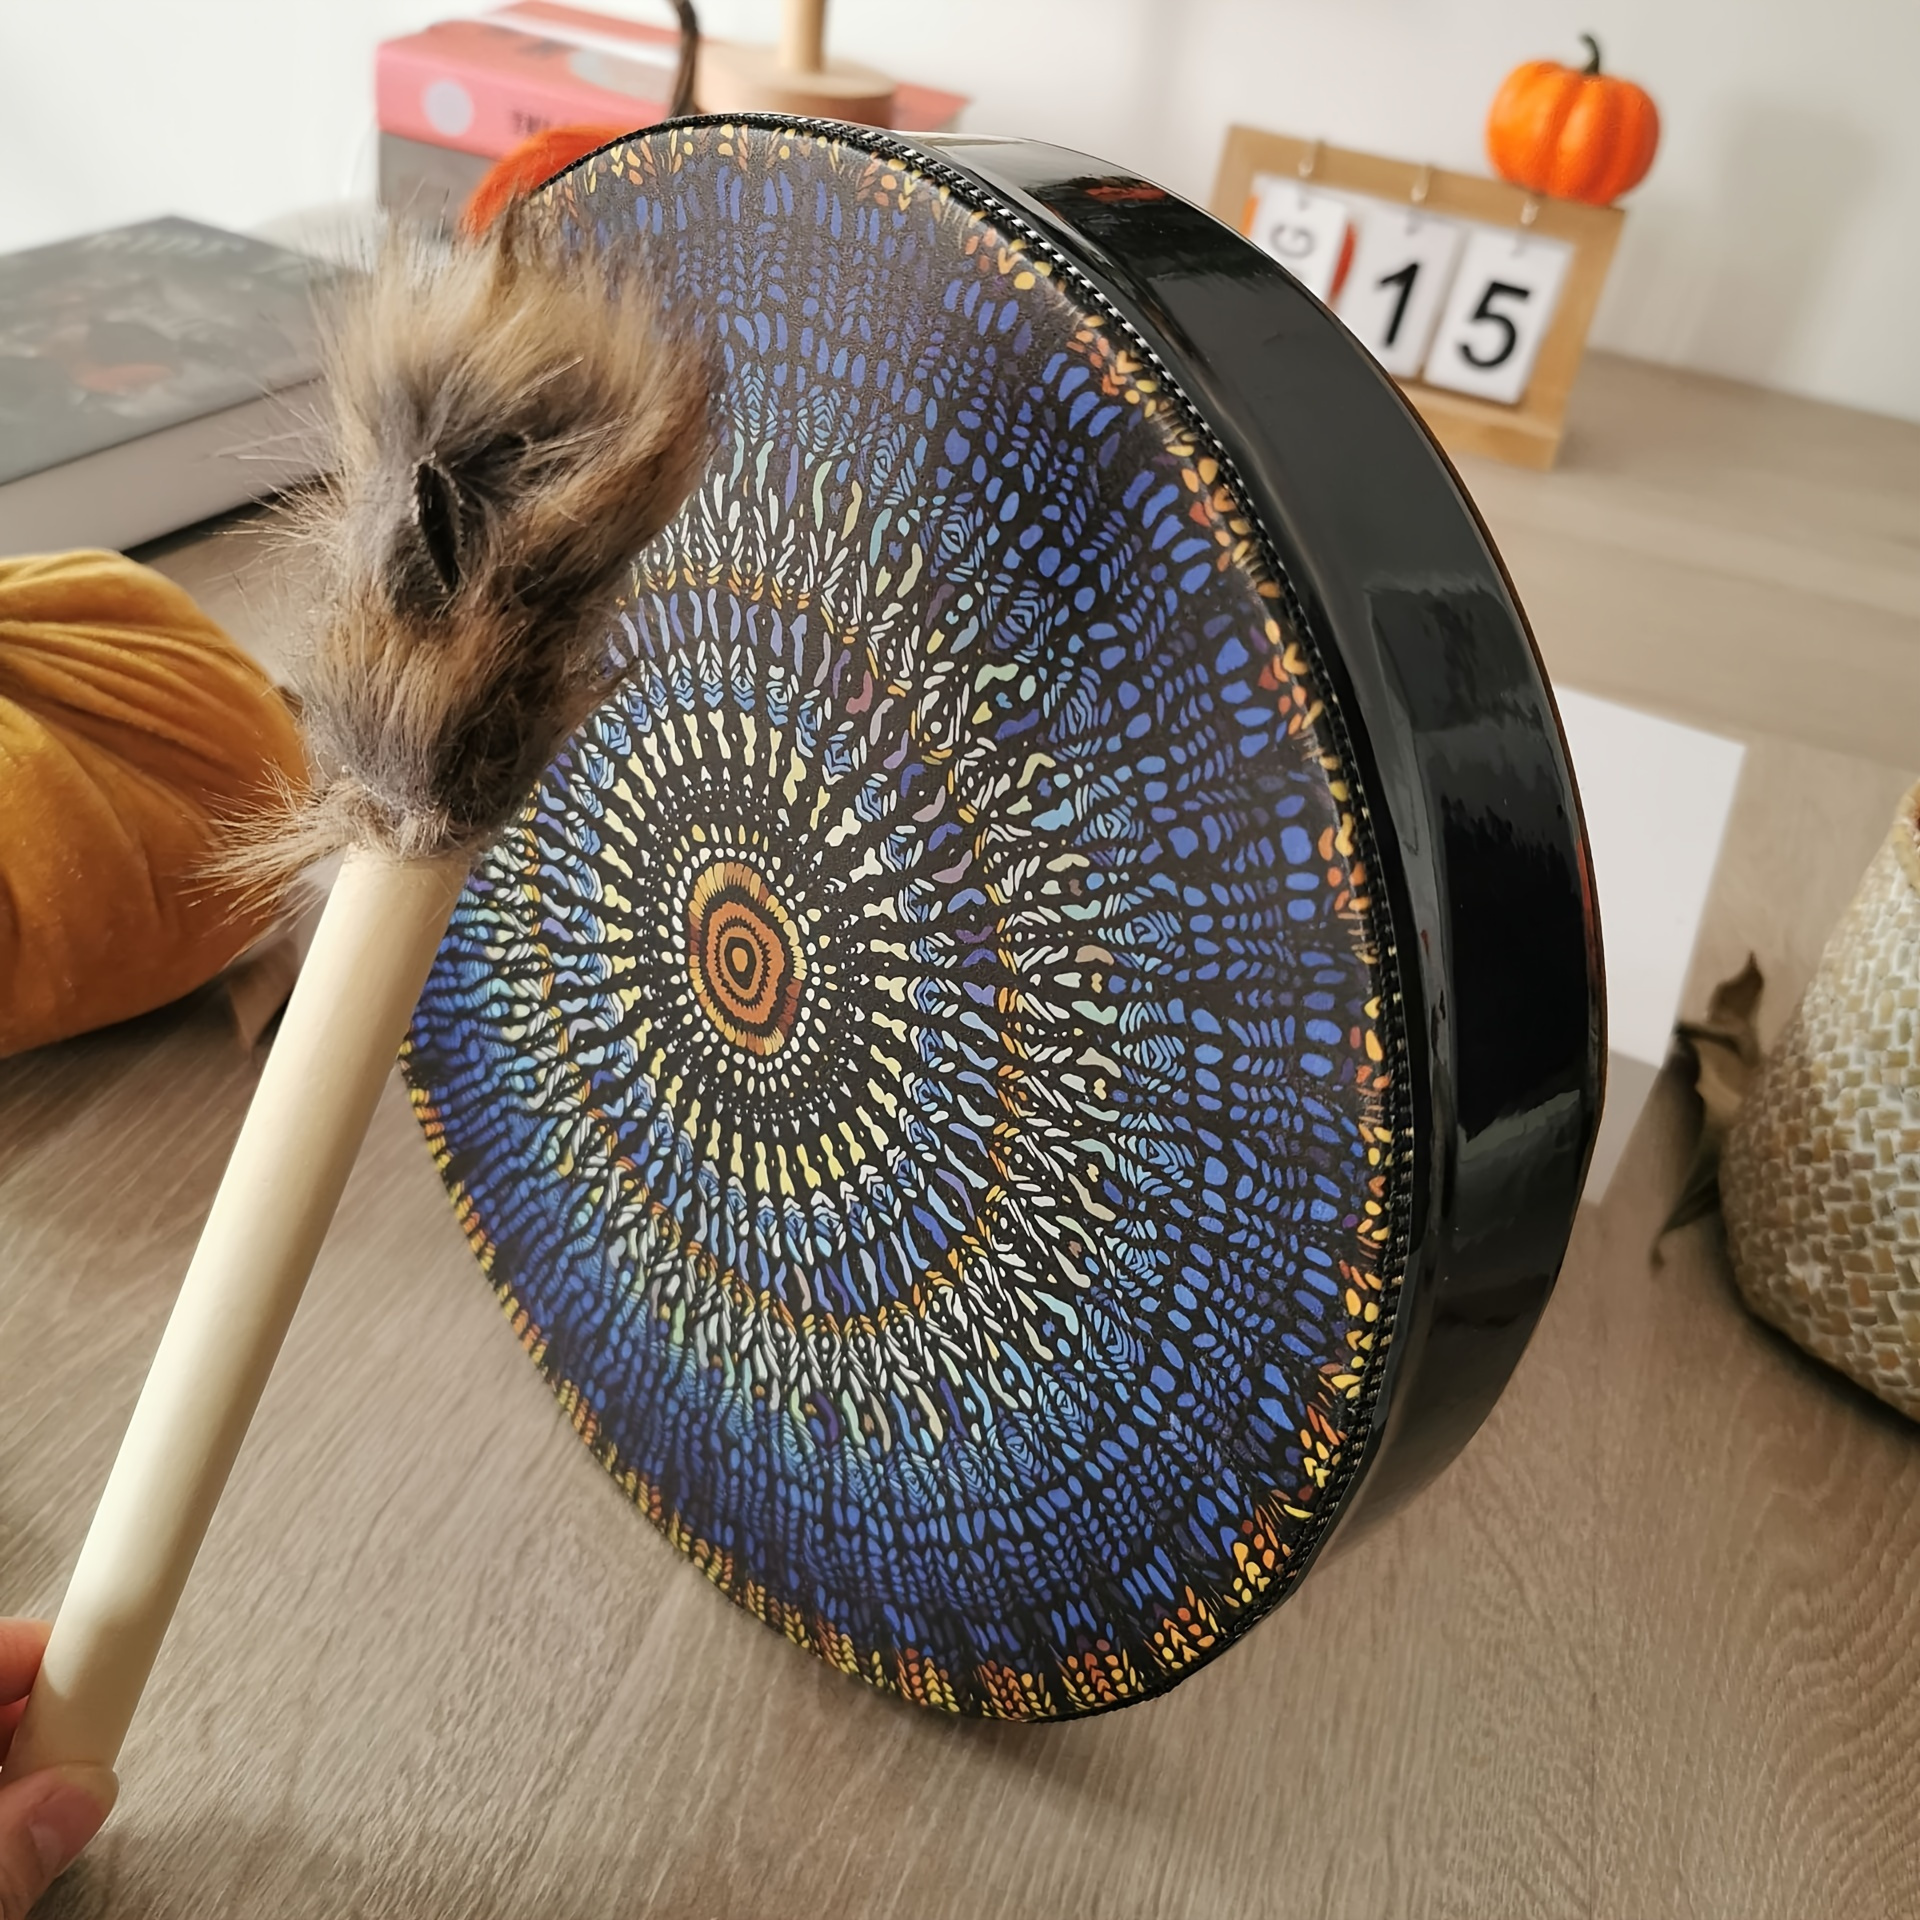 

1set Handcrafted Percussion Drums With Unique Mosaic Design - Perfect For Professional Musicians And Beginners Alike Eid Al-adha Mubarak